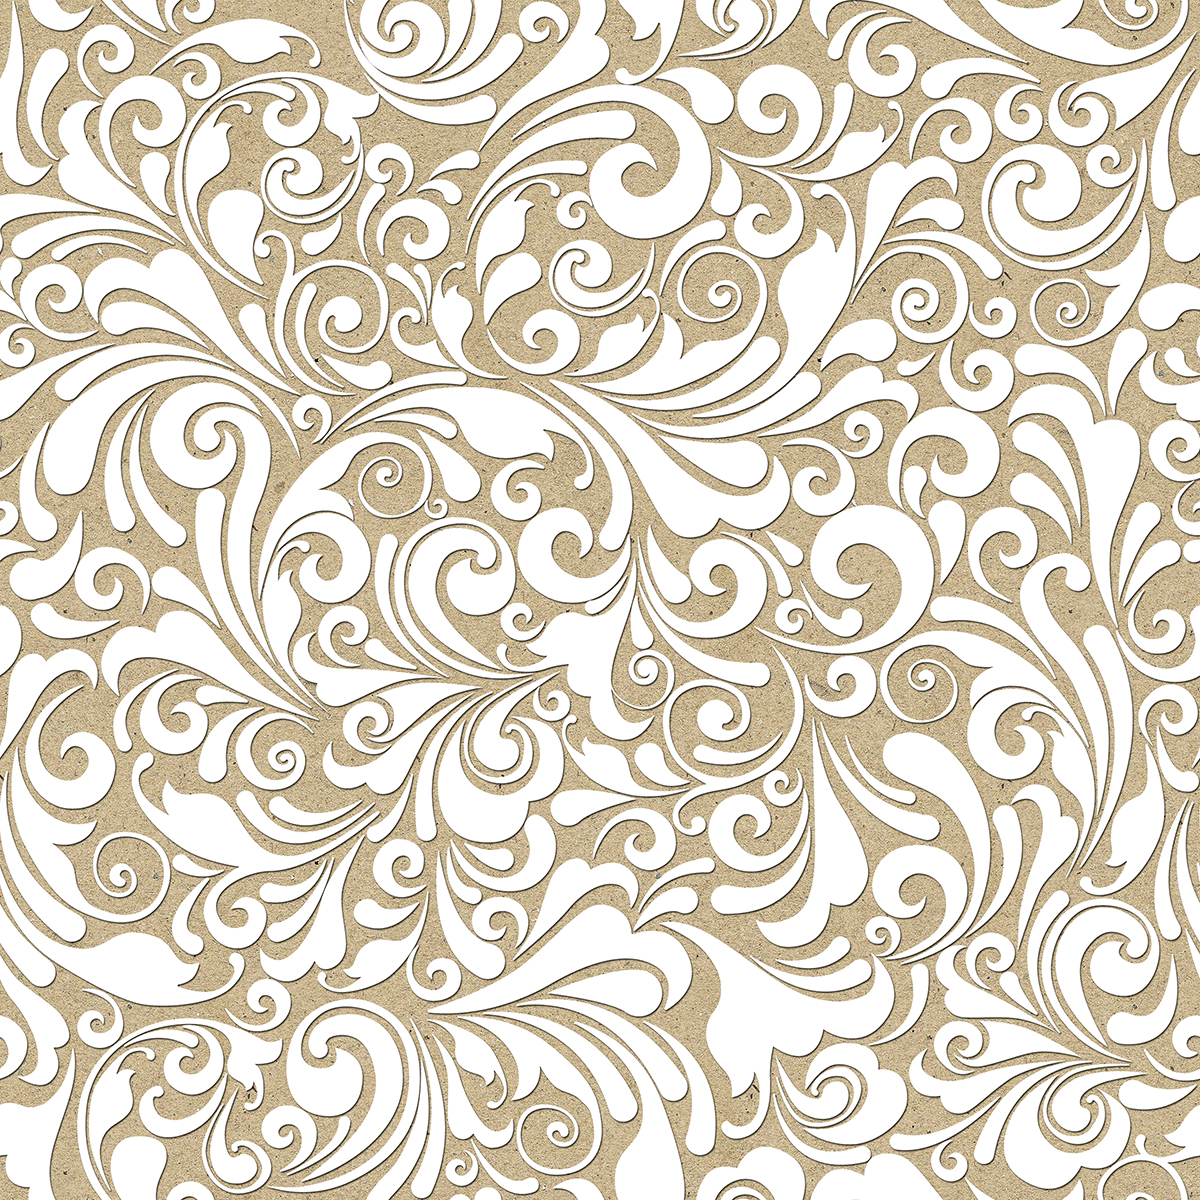 A white and tan swirls on a brown surface